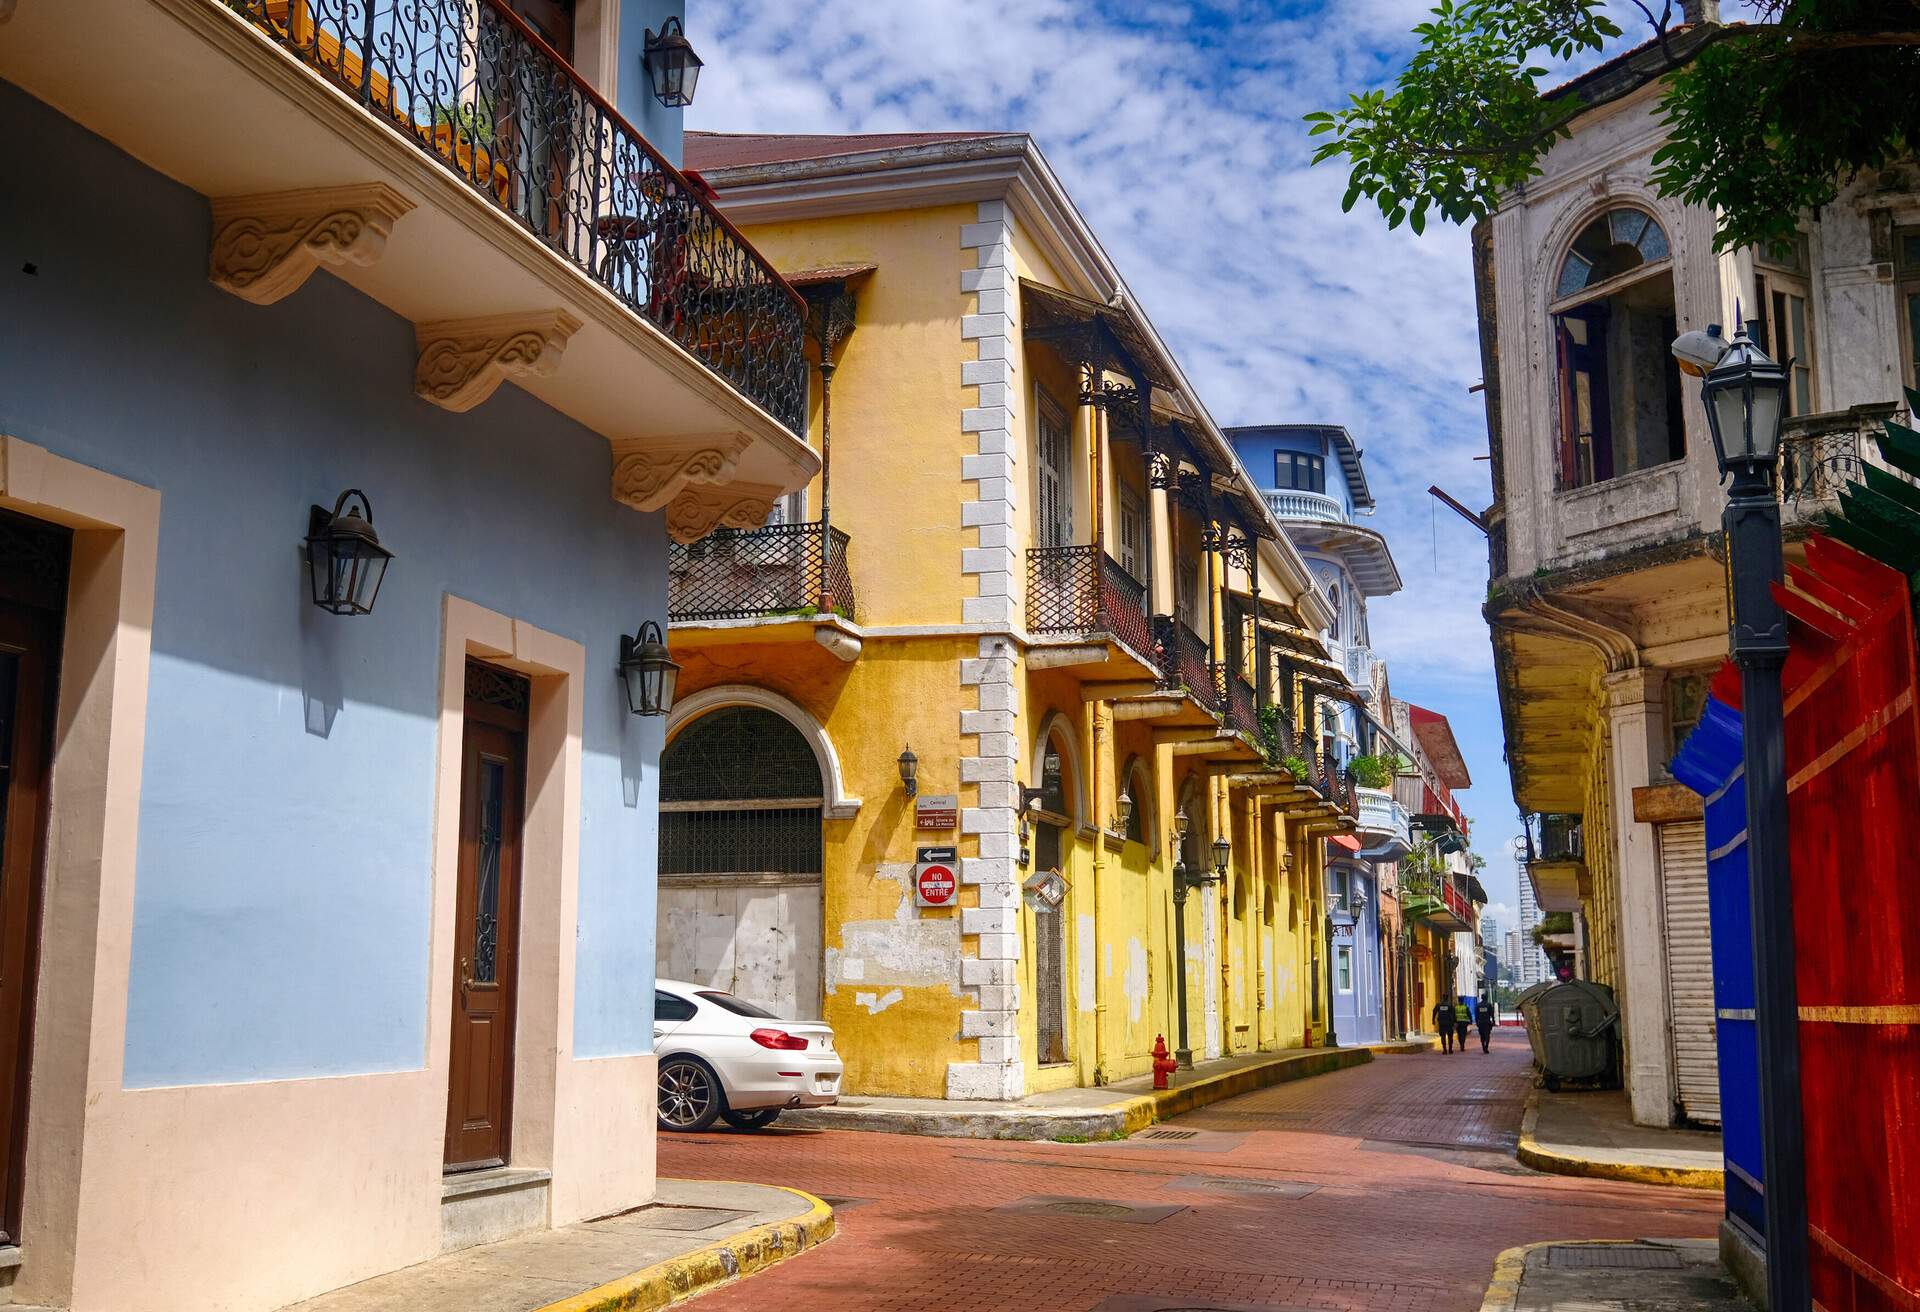 The old town area known as Casco Viejo in Panama City, Panama, and its historic architecture.